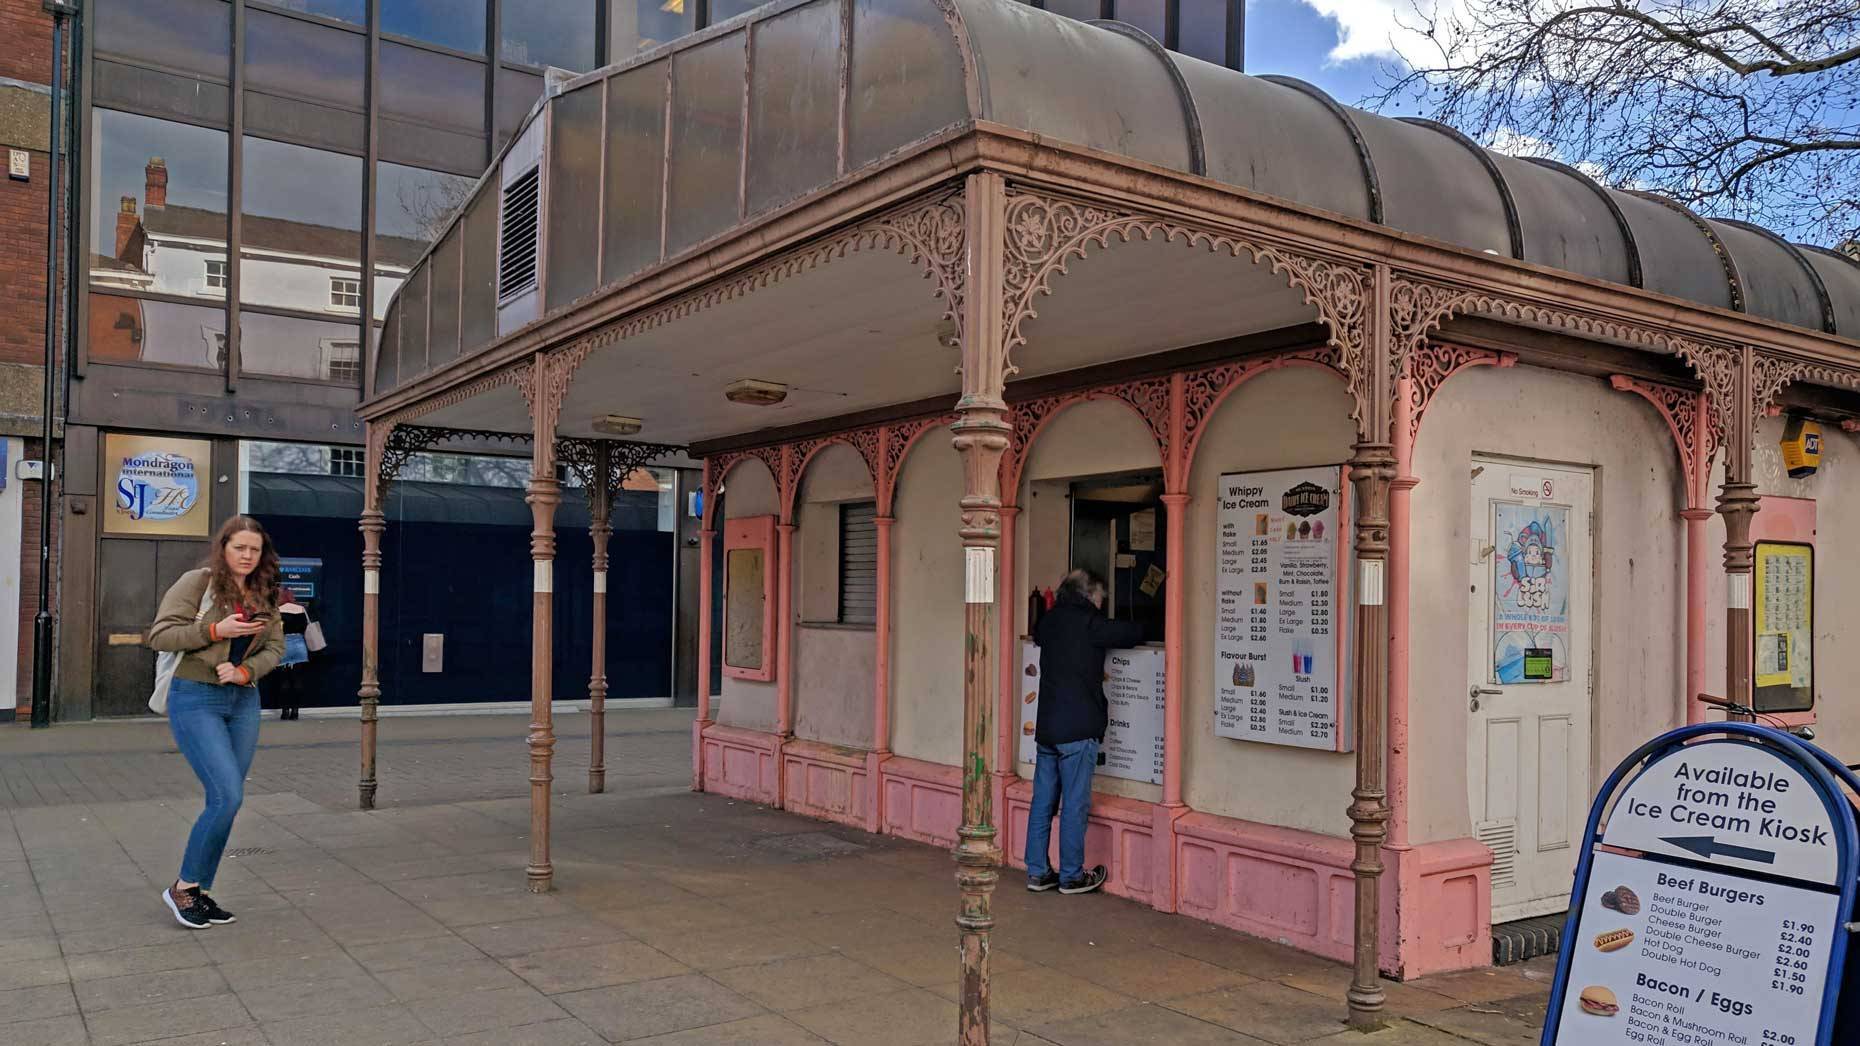 The exterior of the Lincoln Cornhill Kiosk (c) Photo by Fergus Jeffs